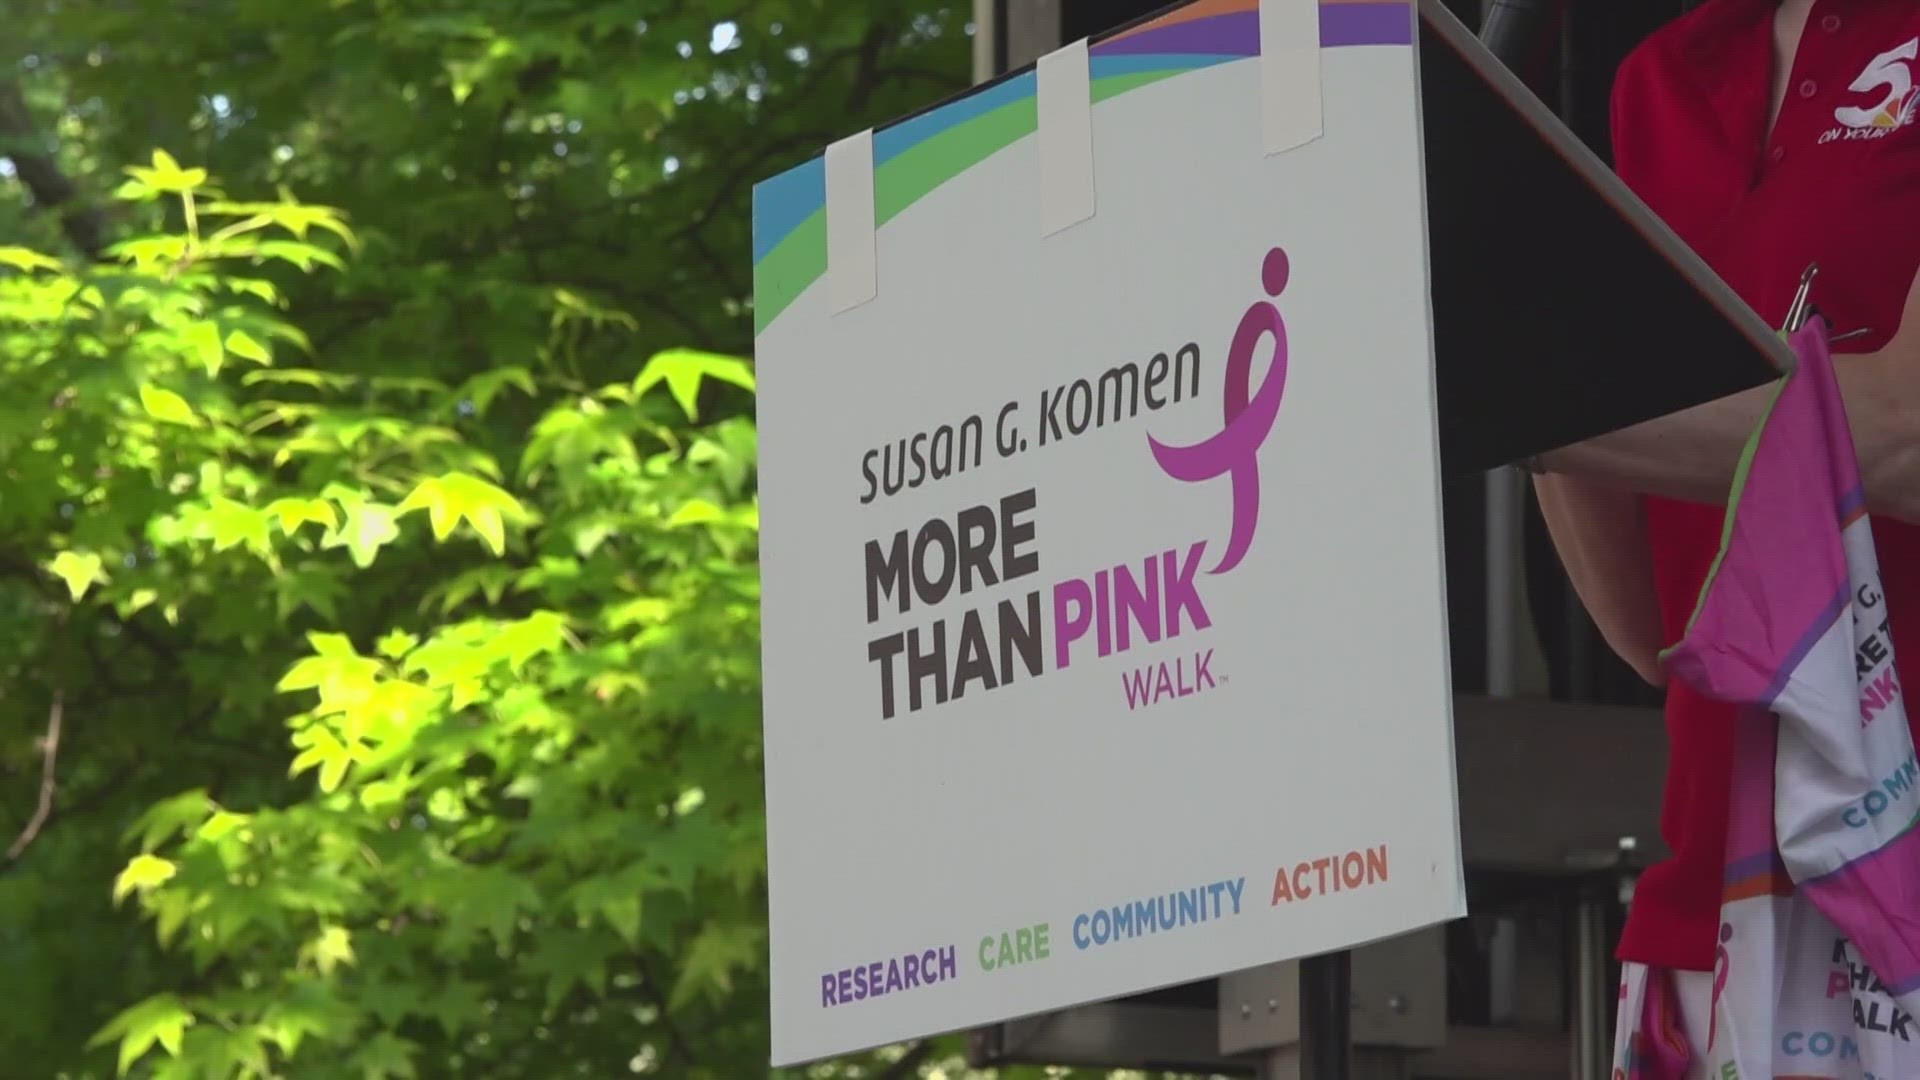 June 8 is the Susan G. Komen More Than Pink Walk in St. Louis’ Tower Grove Park. Susan G. Komen continues to lower the breast cancer mortality rate.